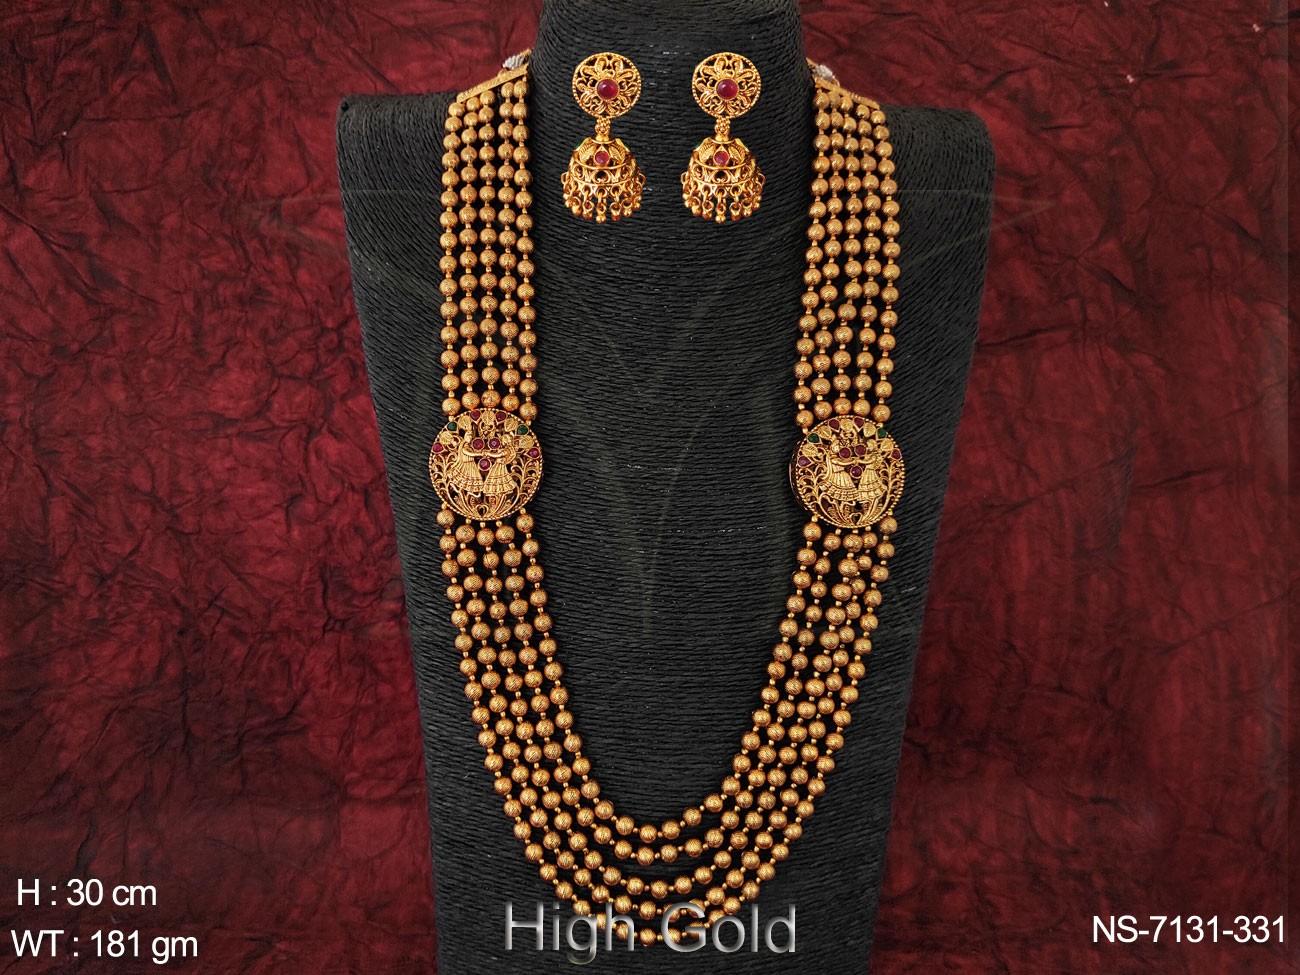 Elevate your style with our ANTIQUE HIGH GOLD POLISH ETHNIC BEADED 5 Layer LONG NECKLACE